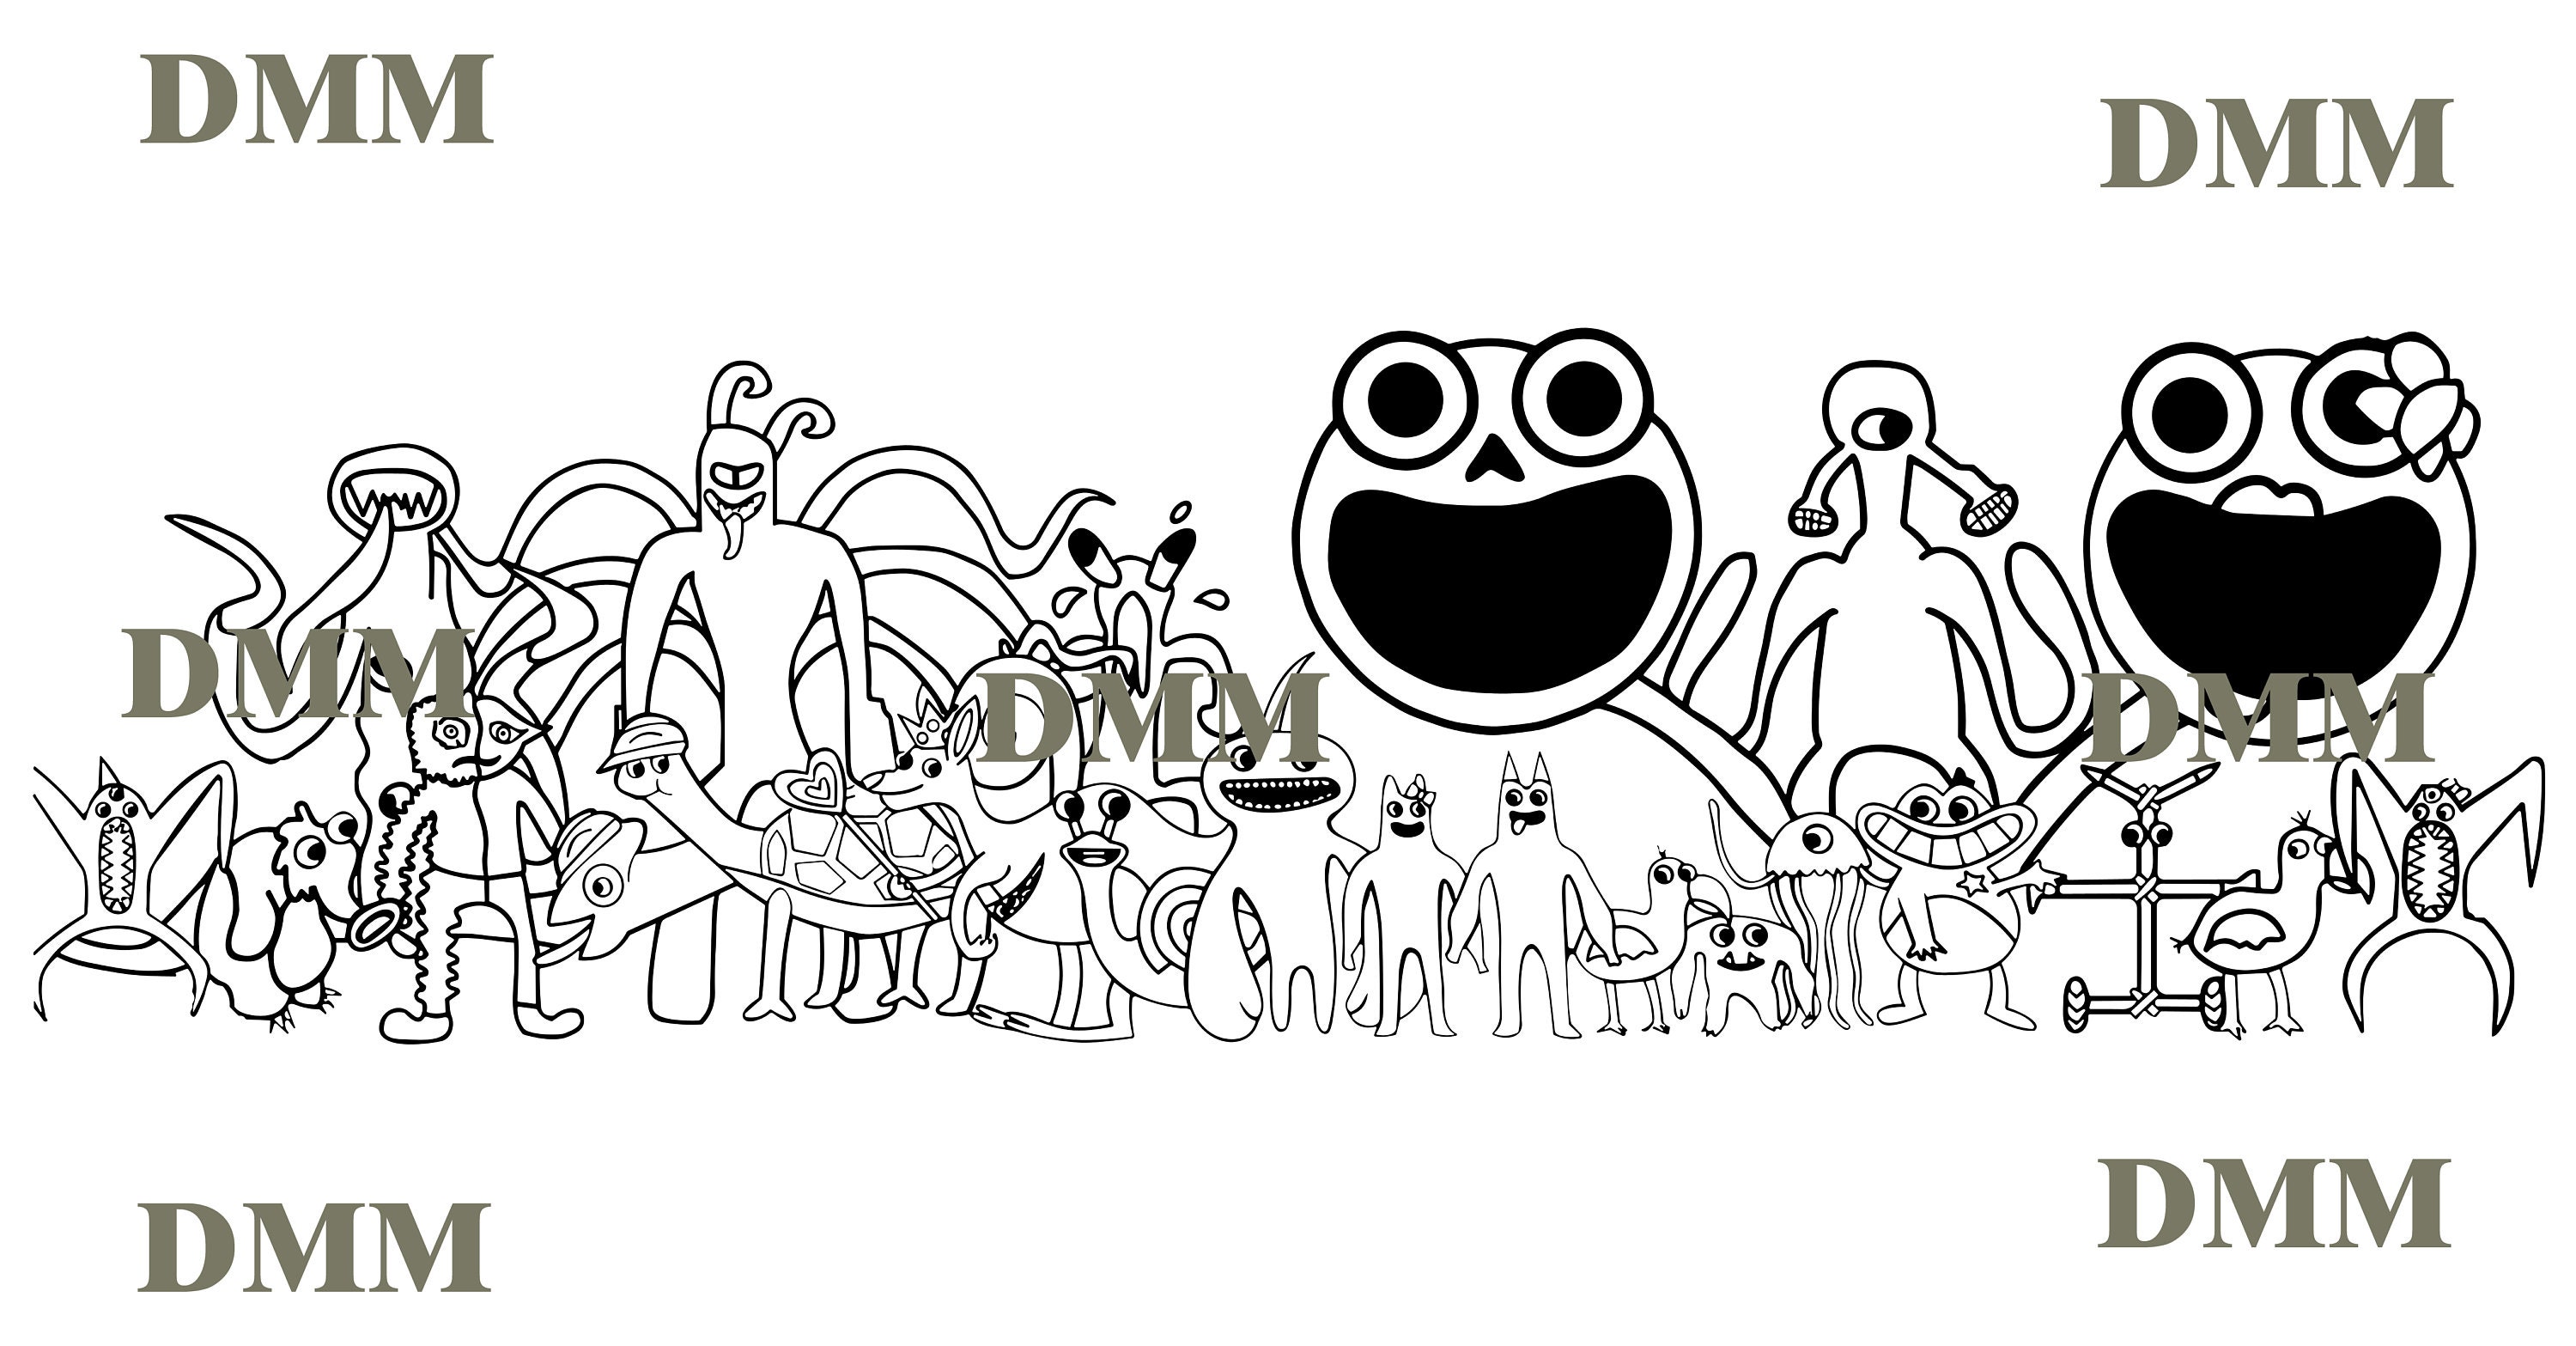 Garten Of Banban New Coloring Pages / How to Color All Monsters from the  Game Garten Of Banban 5 